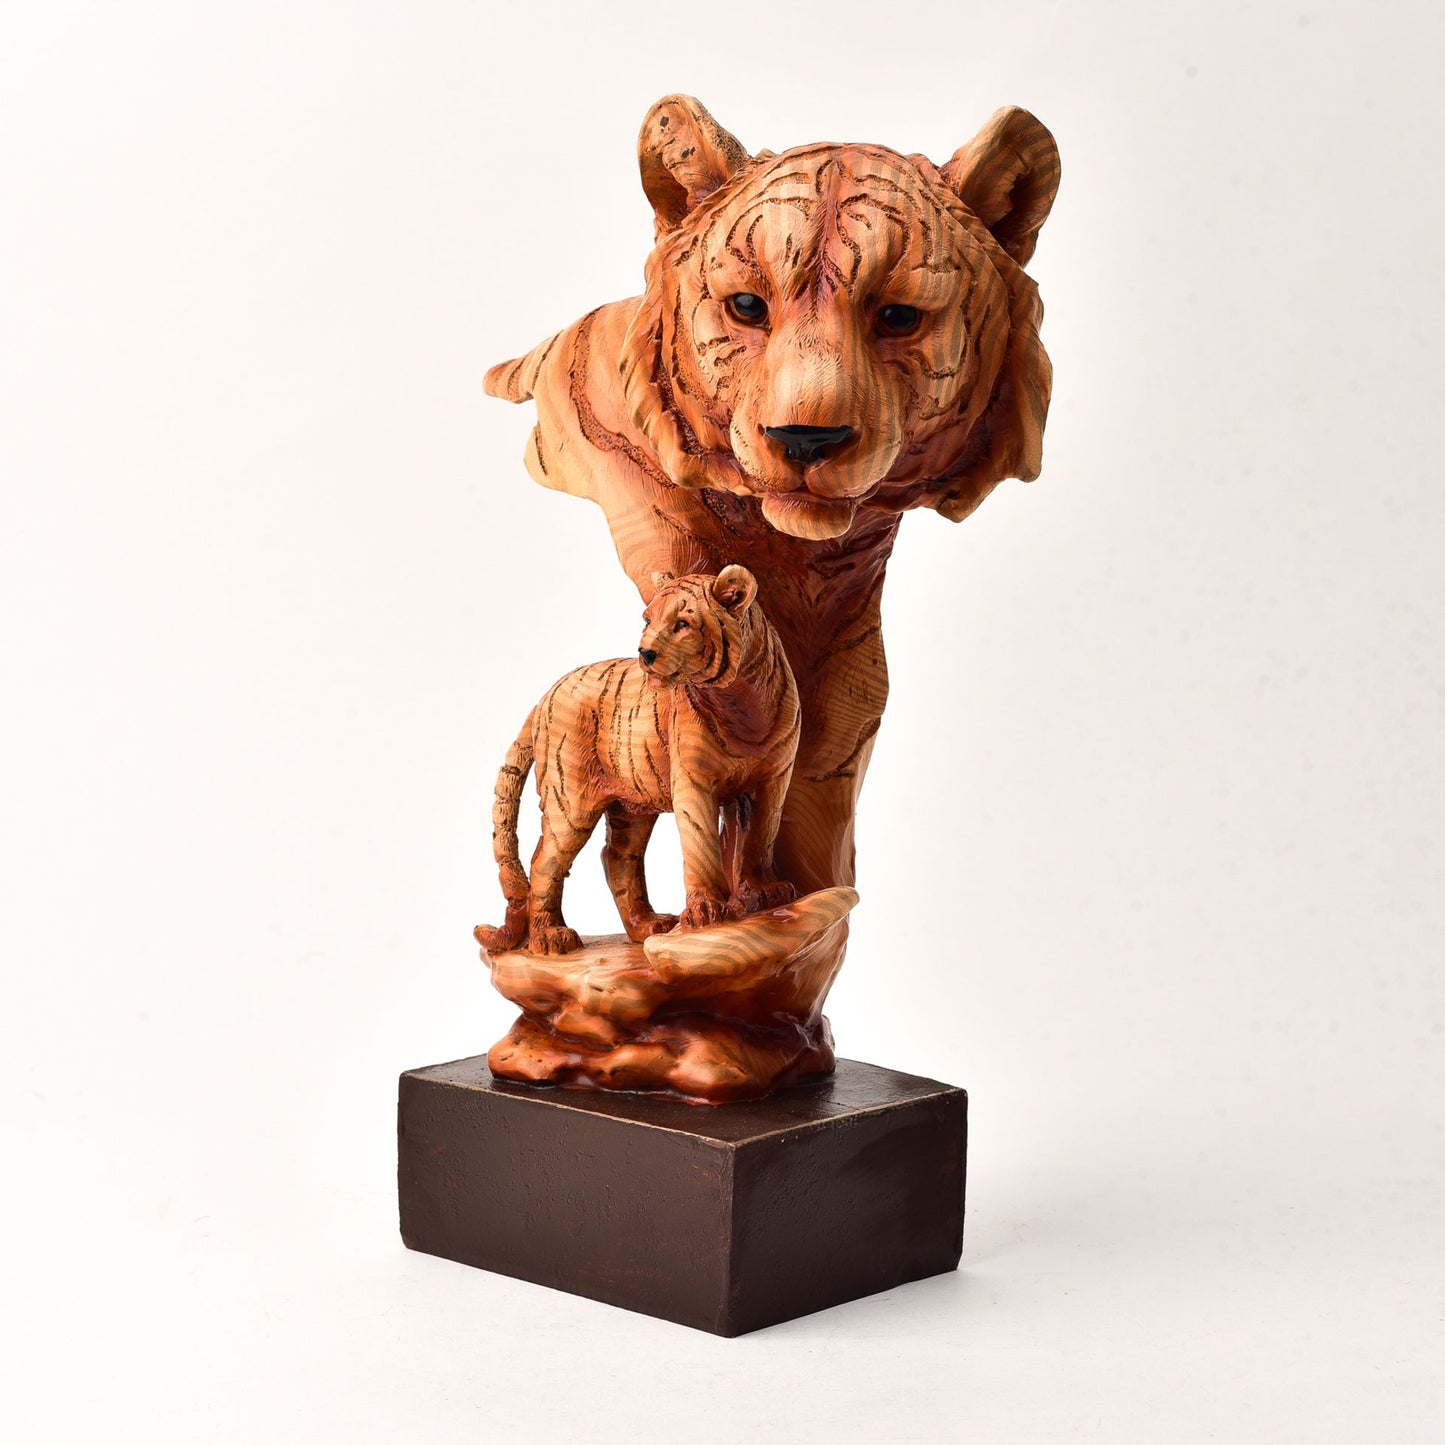 Naturecraft Tiger Head With Cub Wood Effect Resin Figurine